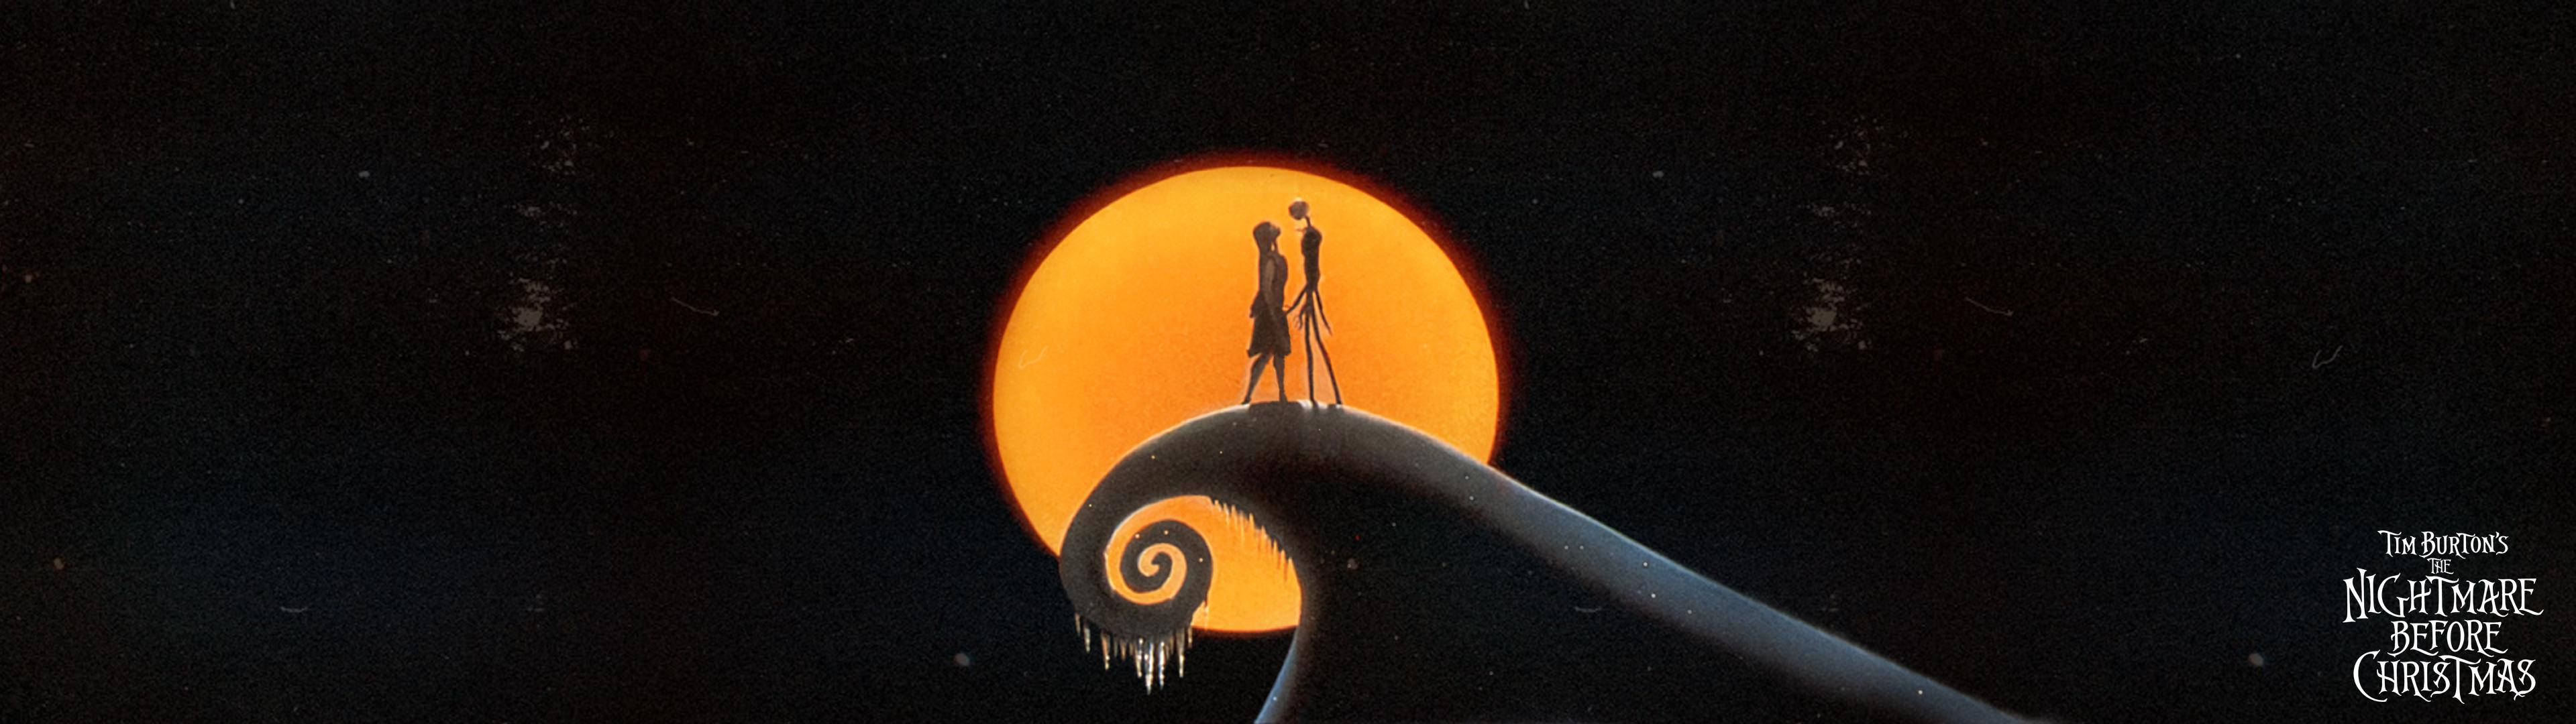 3840X1080 Nightmare Before Christmas Wallpaper and Background